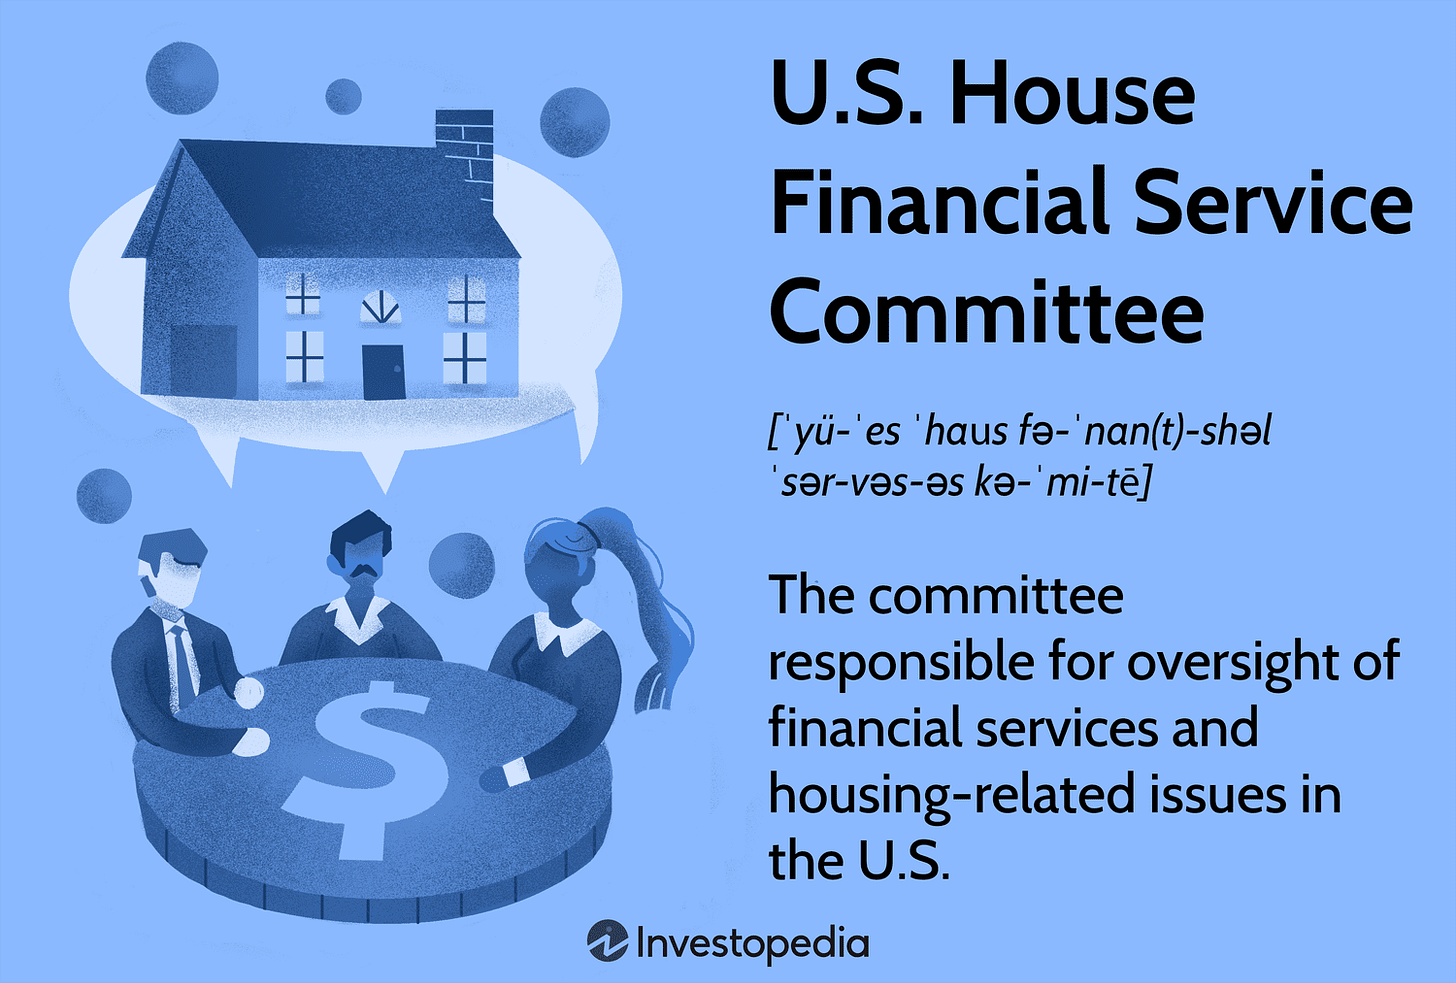 U.S. House Financial Services Committee